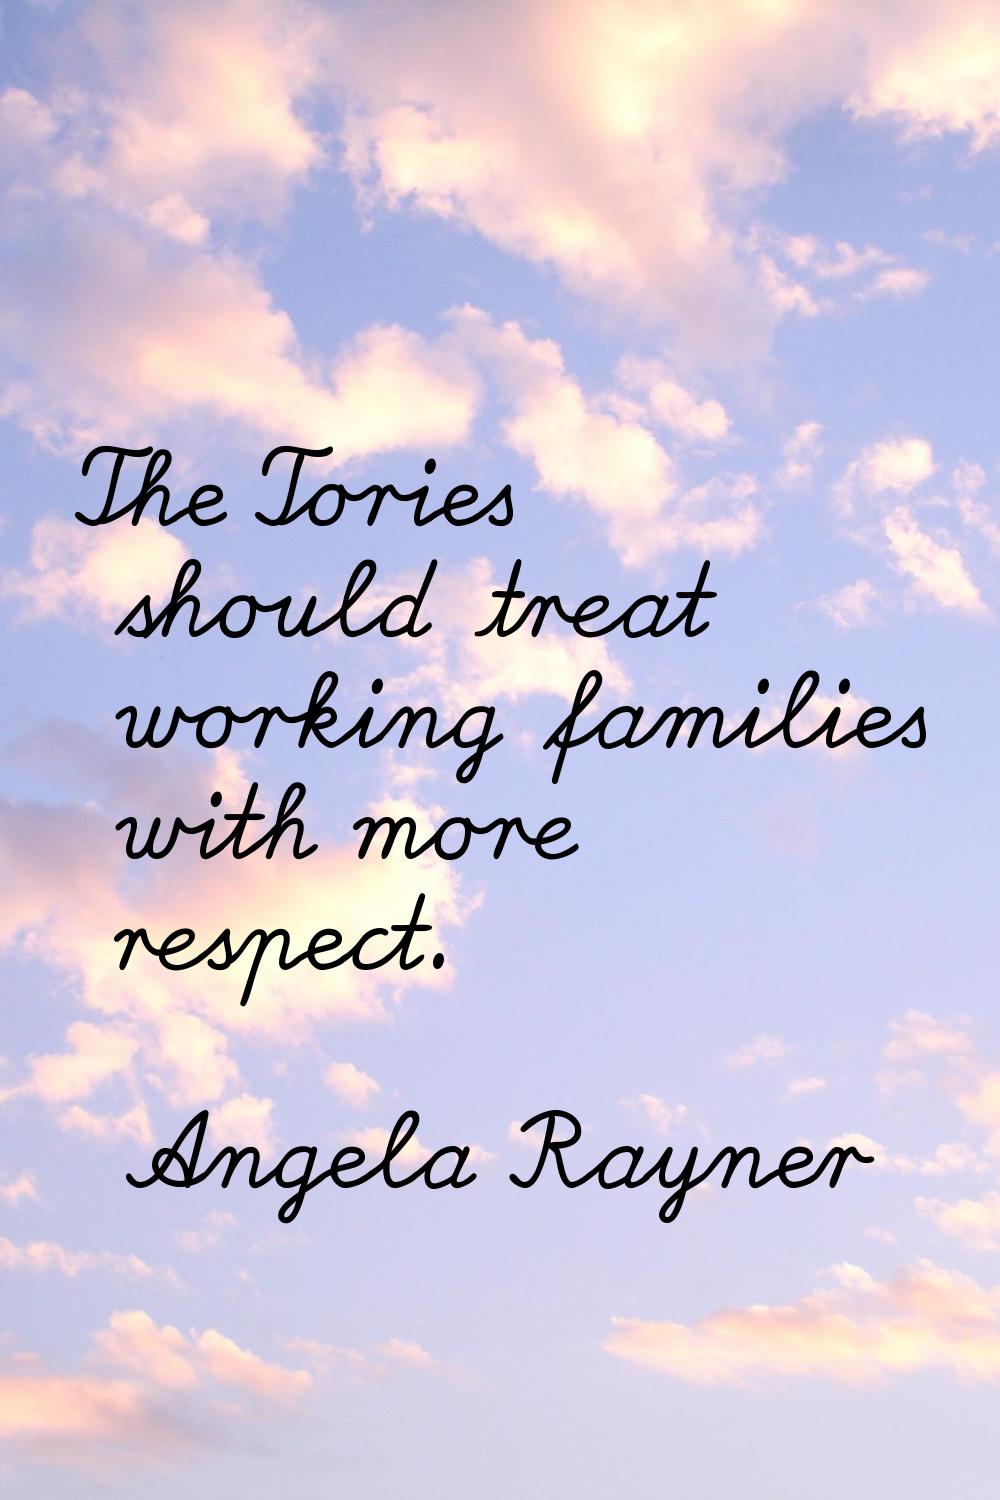 The Tories should treat working families with more respect.